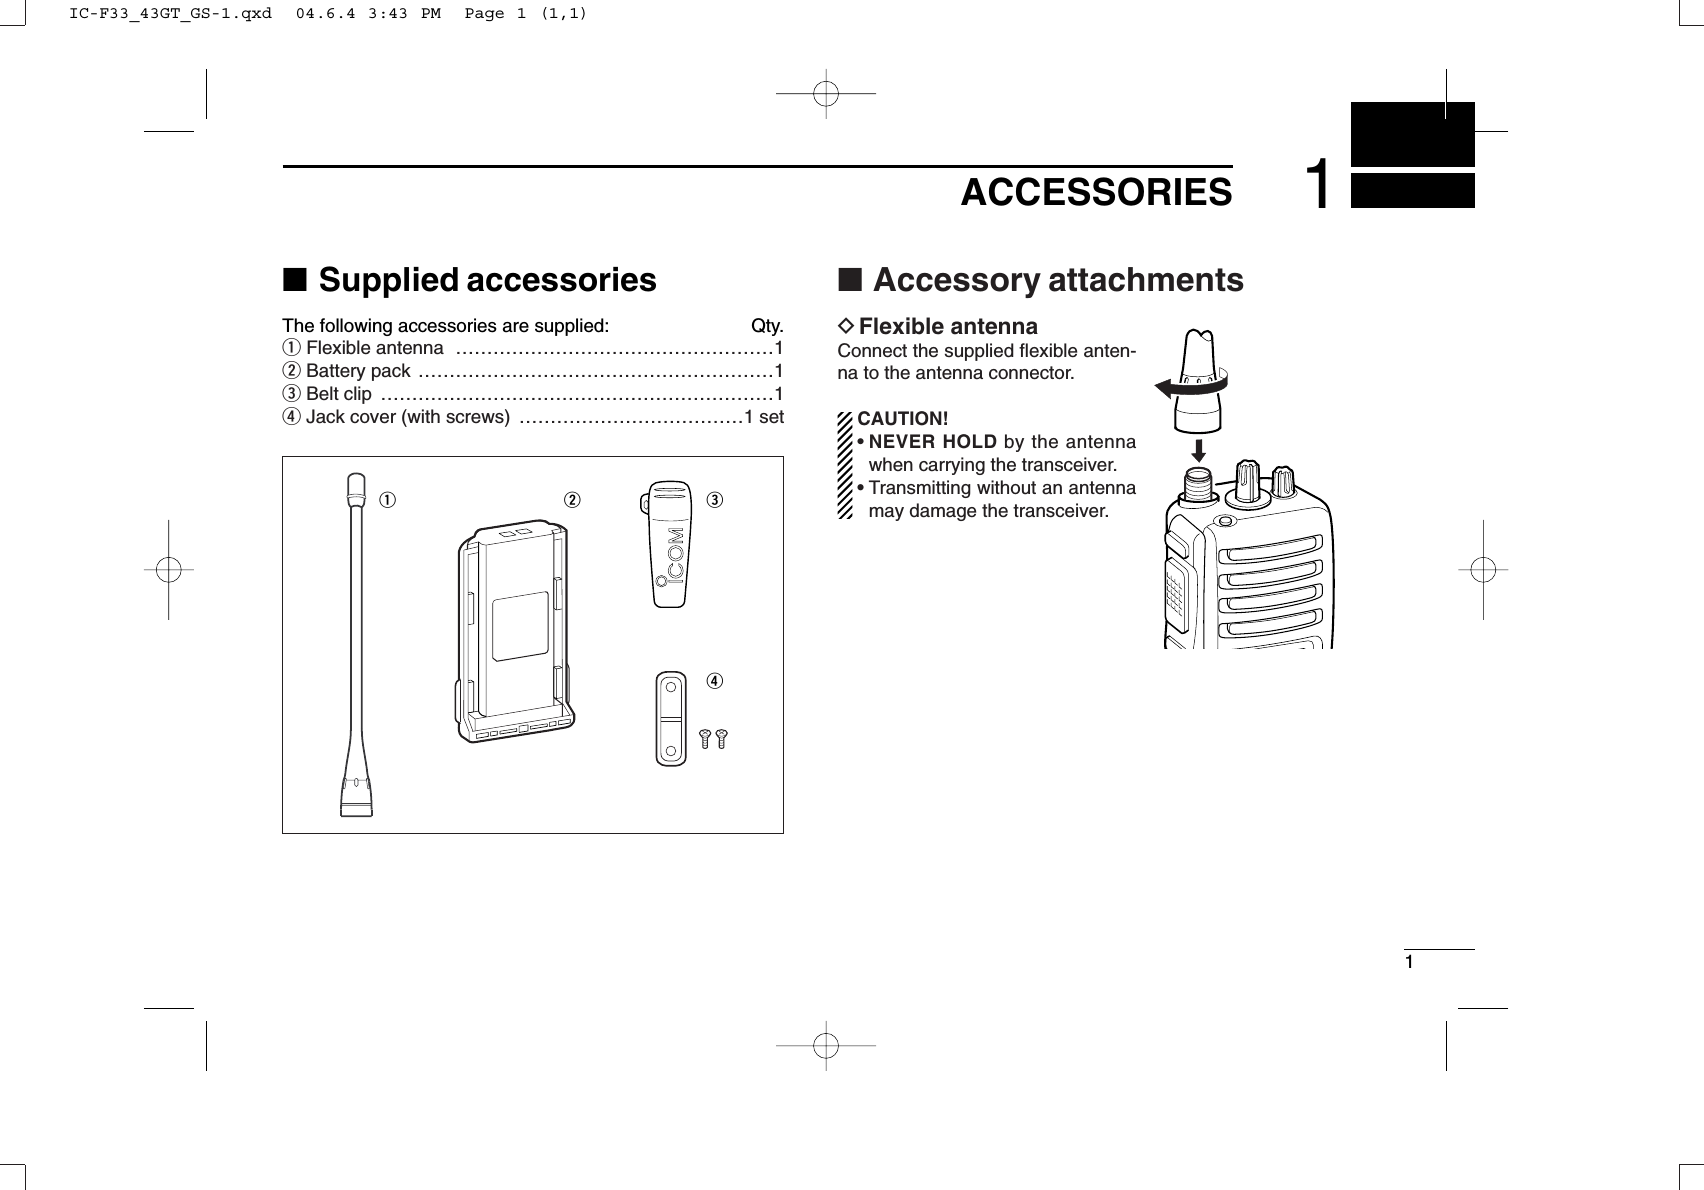 11ACCESSORIES■Supplied accessoriesThe following accessories are supplied: Qty.qFlexible antenna ……………………………………………1wBattery pack …………………………………………………1eBelt clip ………………………………………………………1rJack cover (with screws) ………………………………1 set■Accessory attachmentsDFlexible antennaConnect the supplied ﬂexible anten-na to the antenna connector.CAUTION!• NEVER HOLD by the antennawhen carrying the transceiver.• Transmitting without an antennamay damage the transceiver.qwerIC-F33_43GT_GS-1.qxd  04.6.4 3:43 PM  Page 1 (1,1)